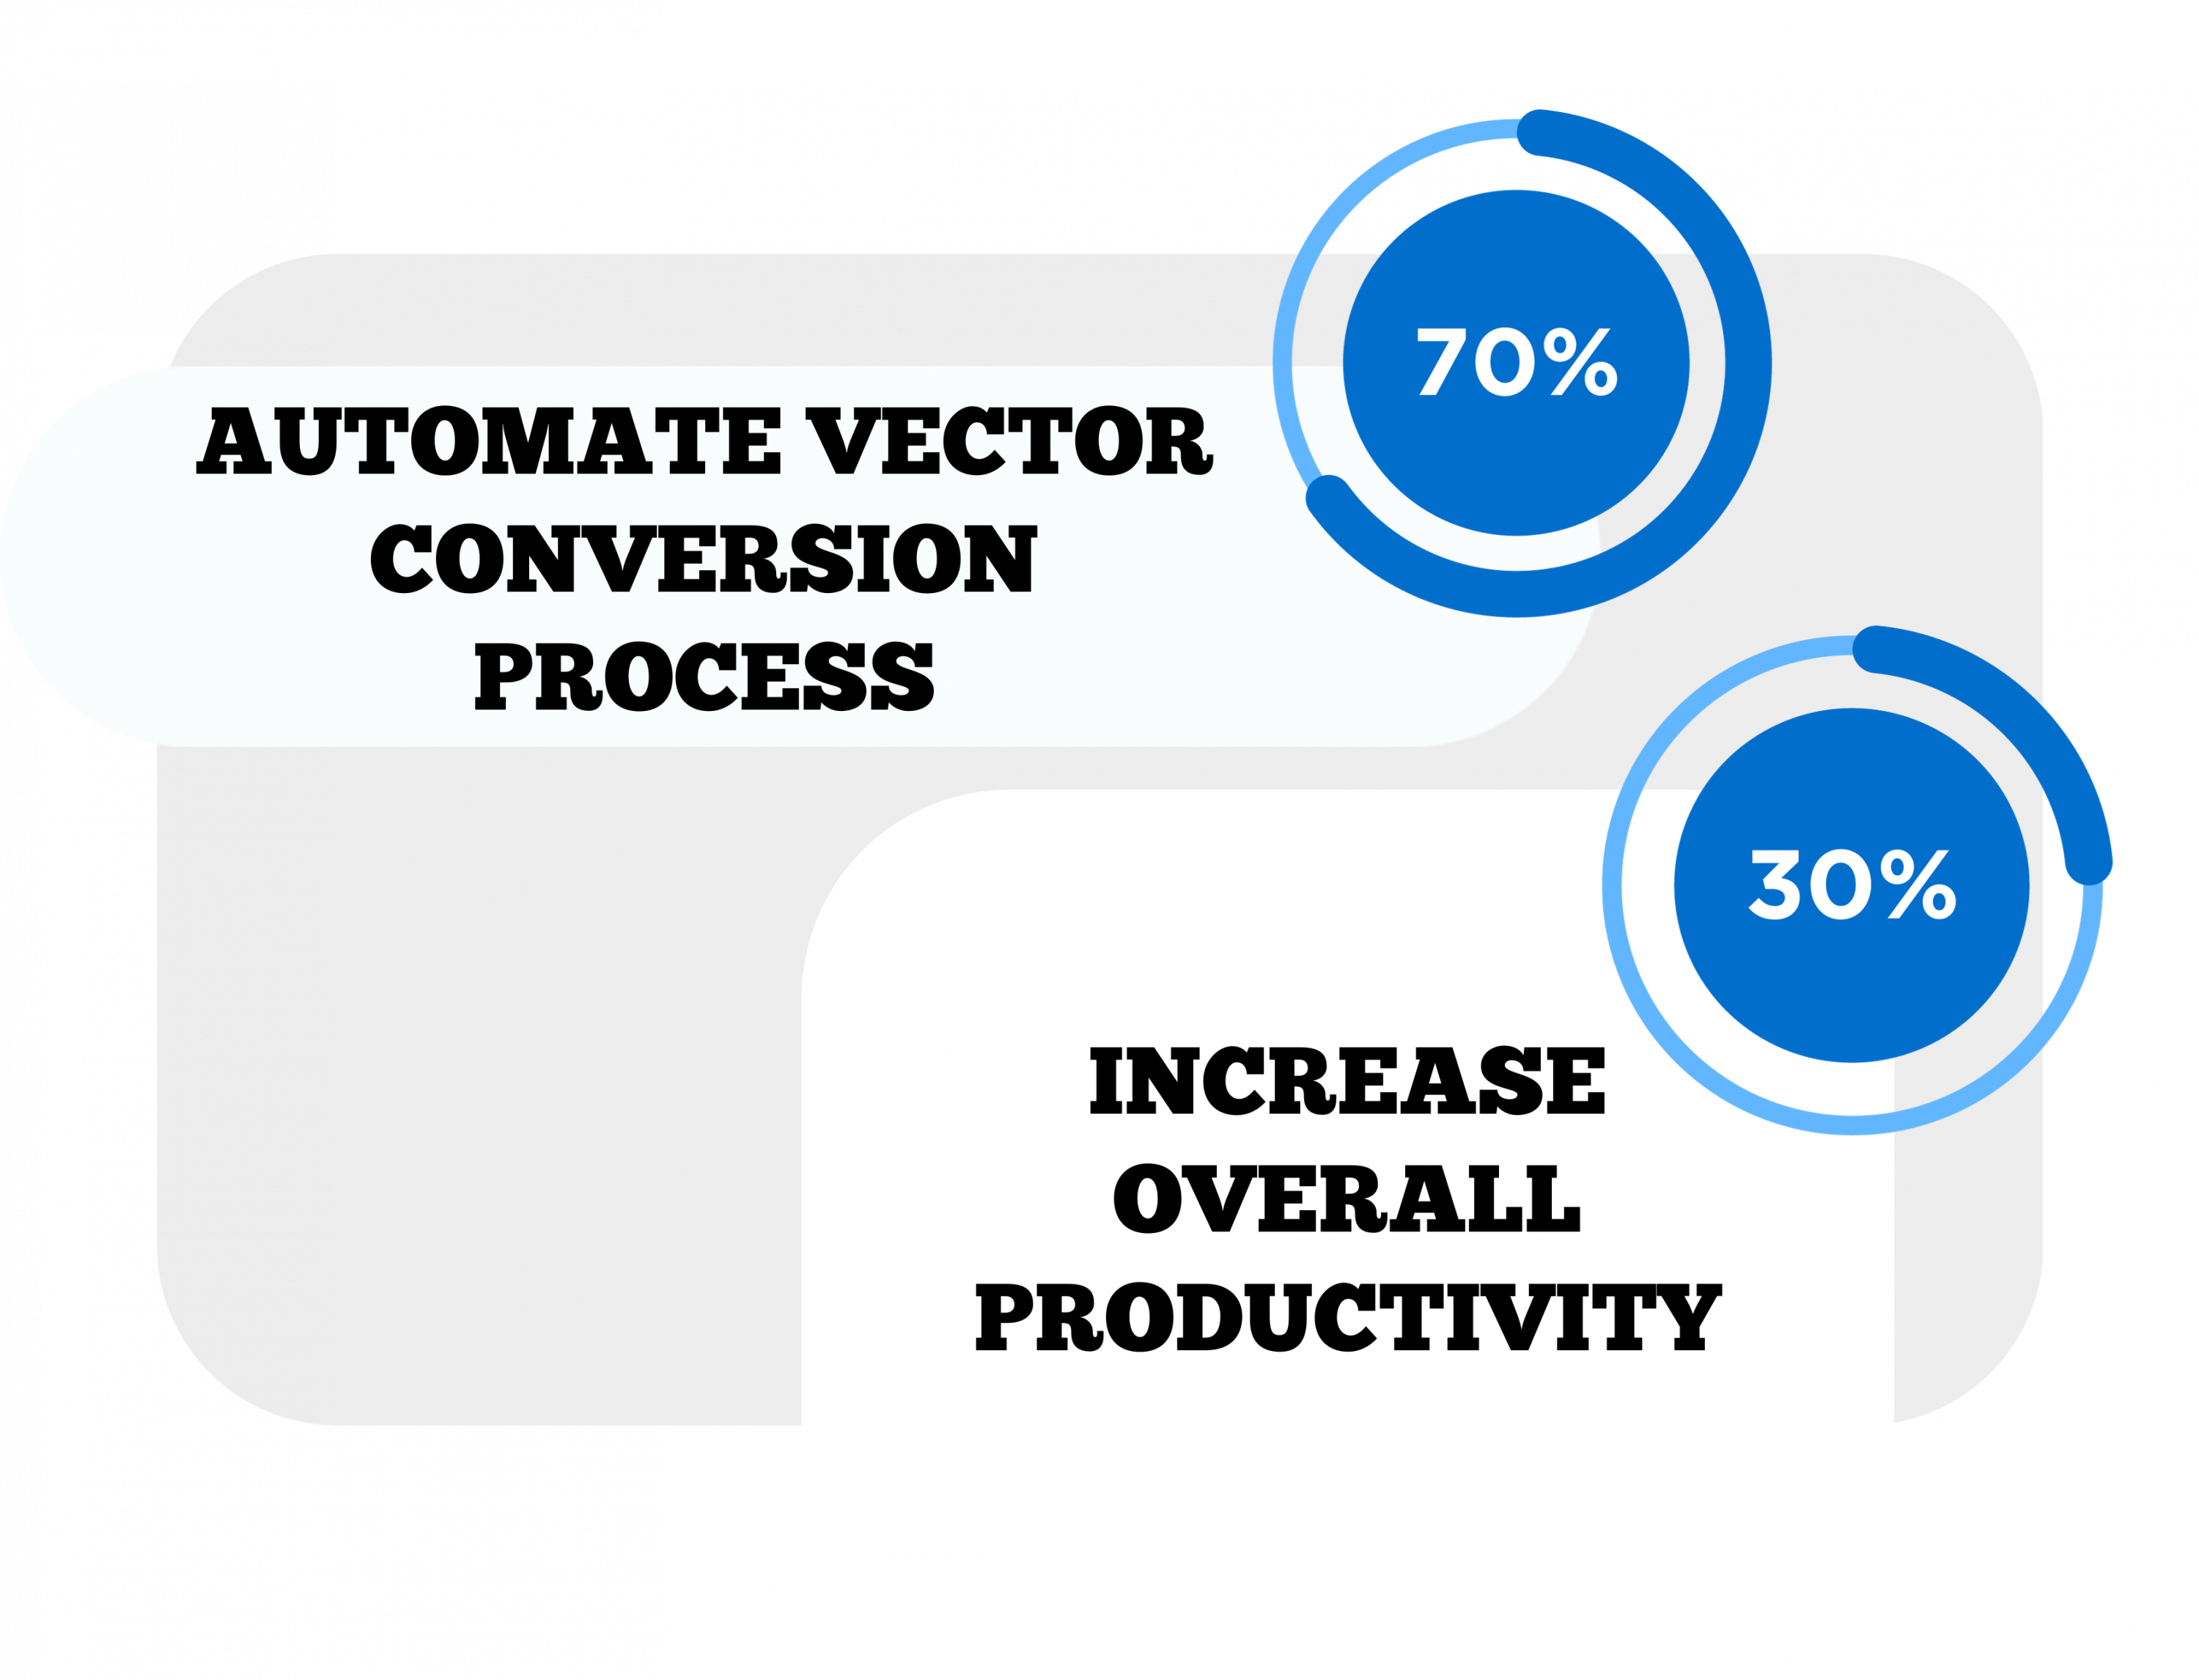 Automate Cector Conversion process and increase overall productivity